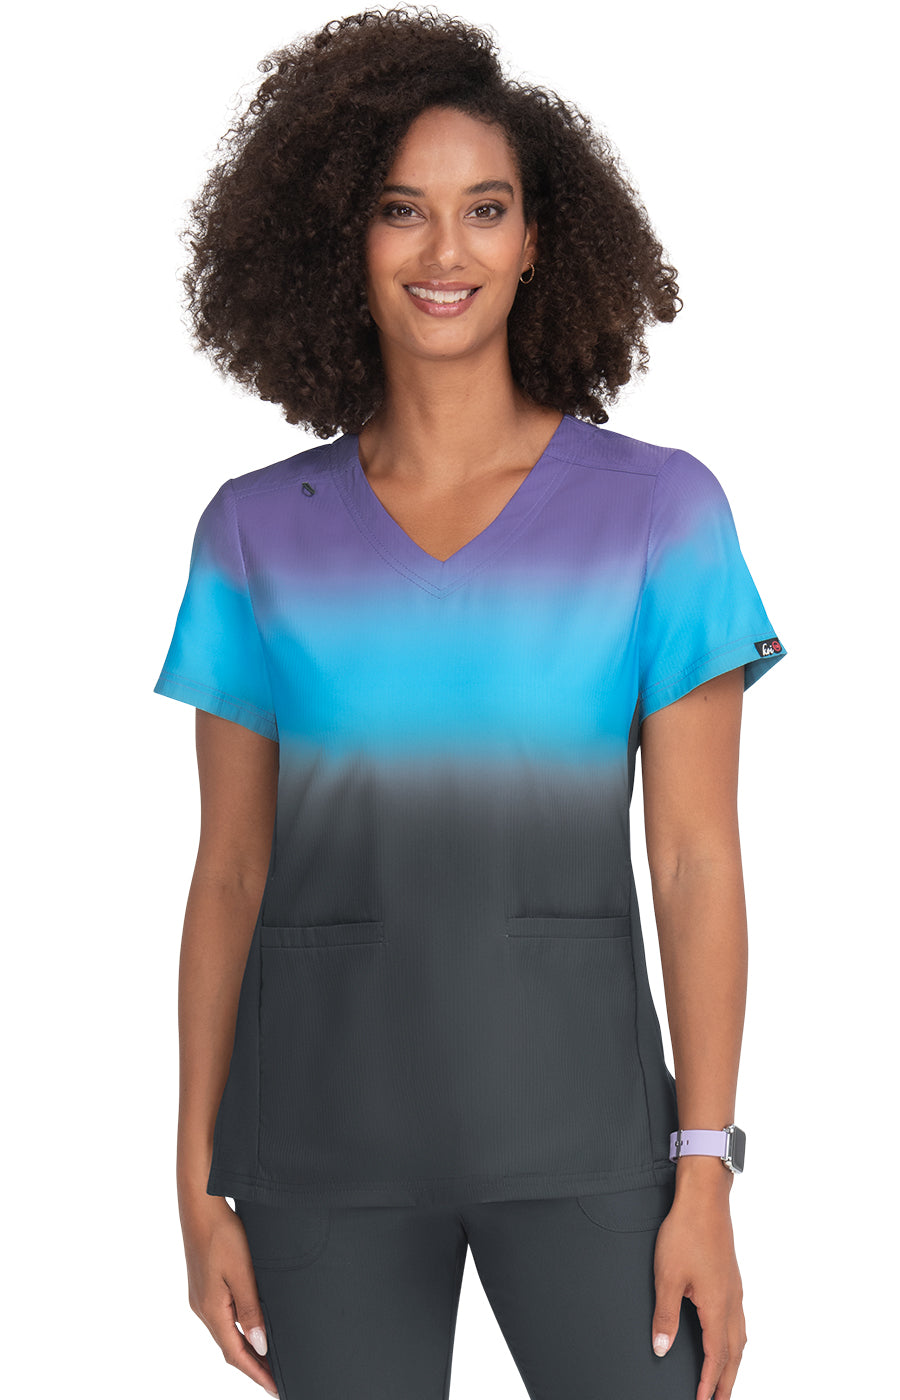 Reclaim Placement Top Wisteria/Electric Blue/Charcoal Ombre